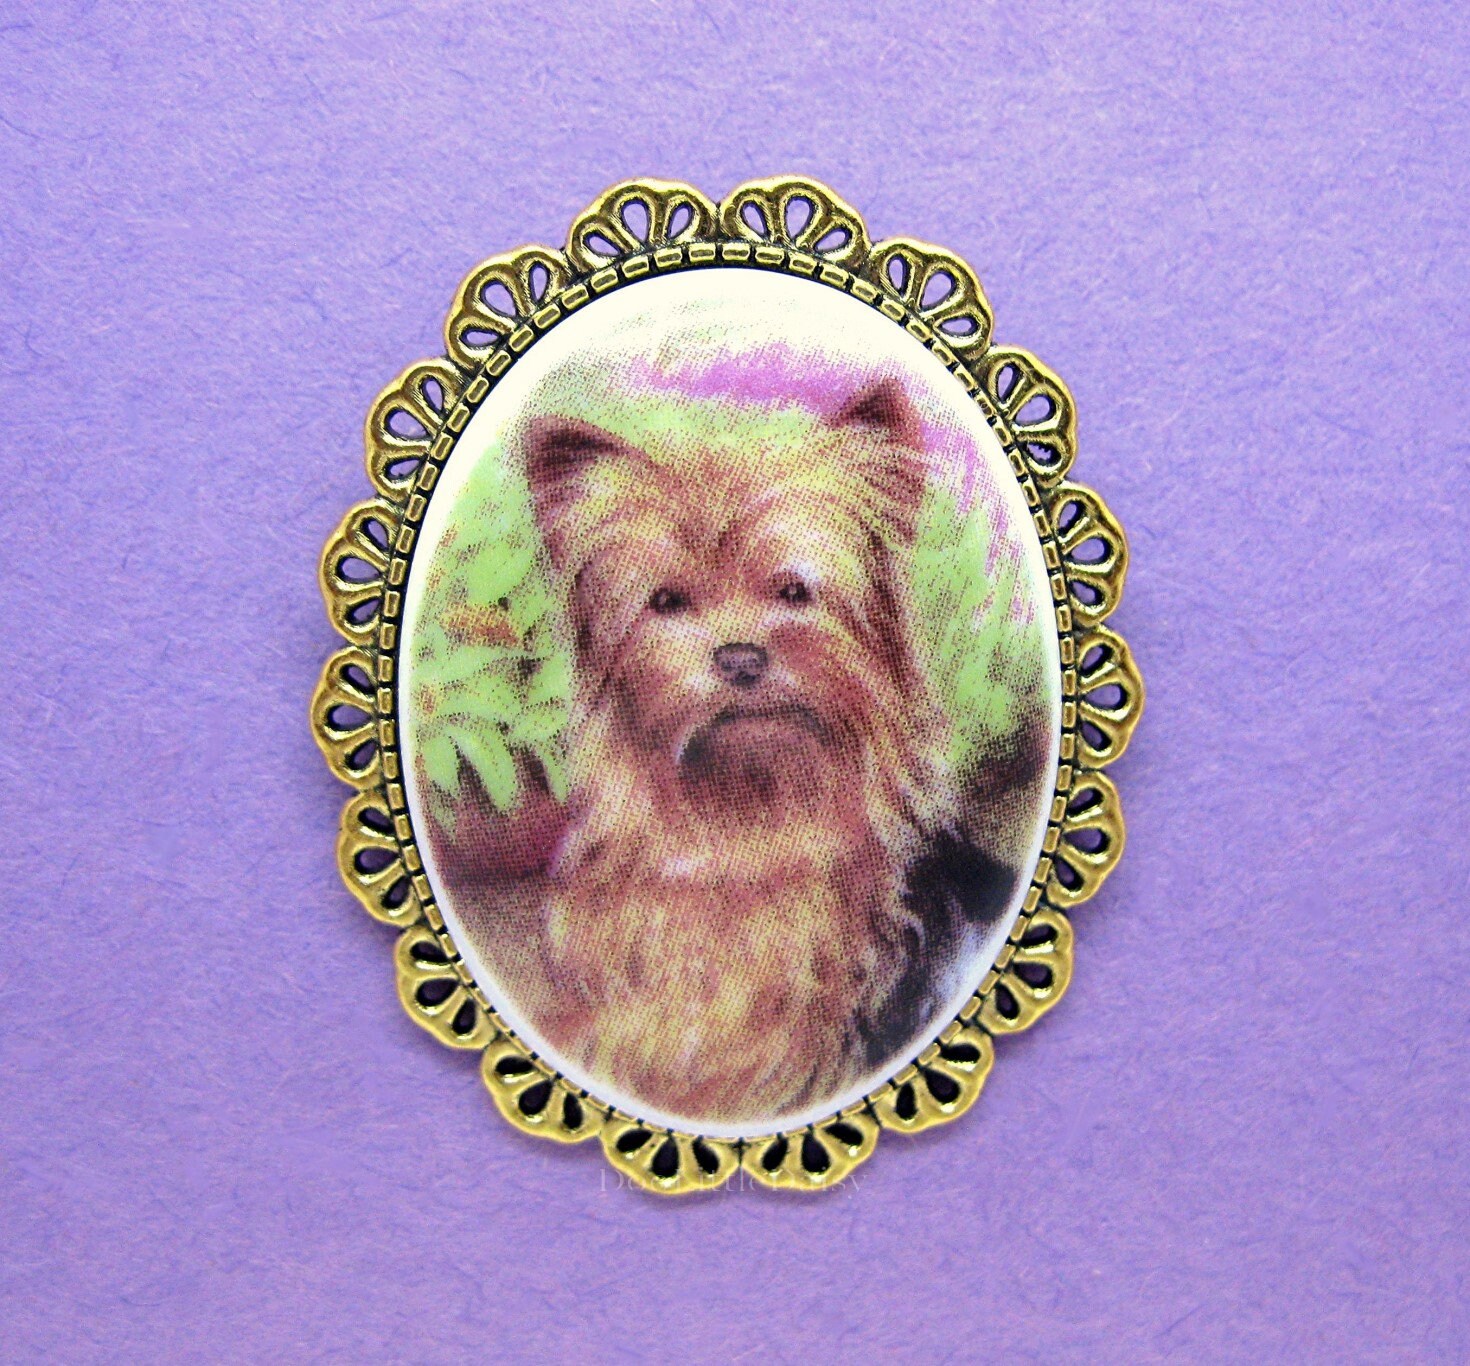 Yorkshire Terrier Pet Jewellery Brooches Yorkie Pins & Clips Clothing & Shoe Clips Croc Shoe Charms Dog Puppy Brown Animals Each Sold Separately 